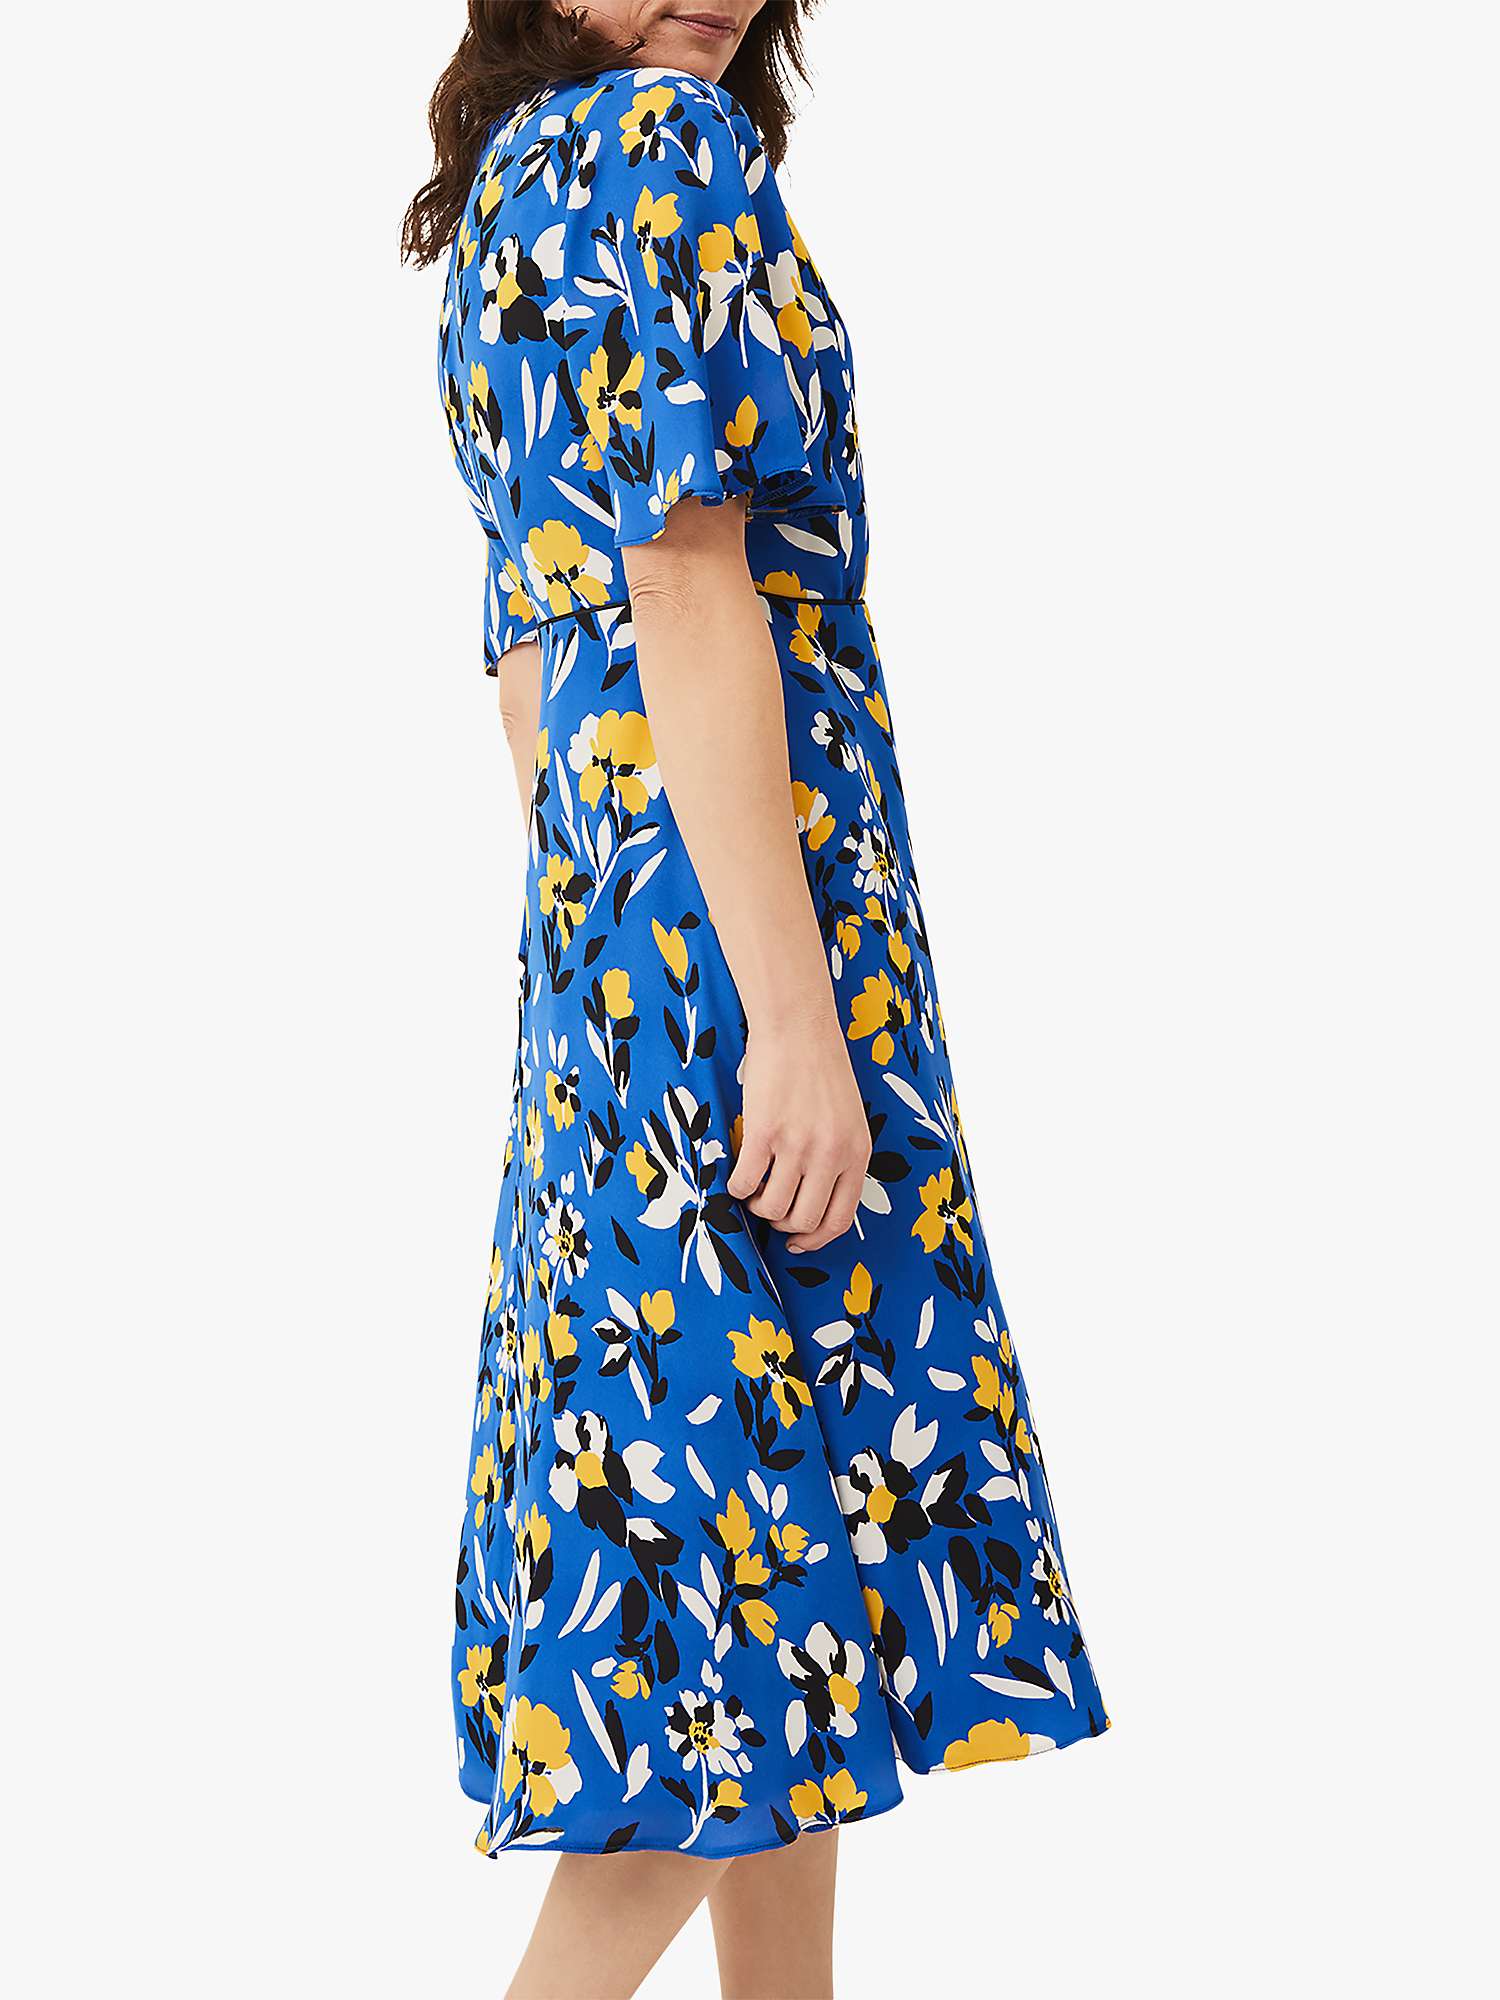 Buy Phase Eight Jayla Floral Print Dress, Almond/Canary Online at johnlewis.com